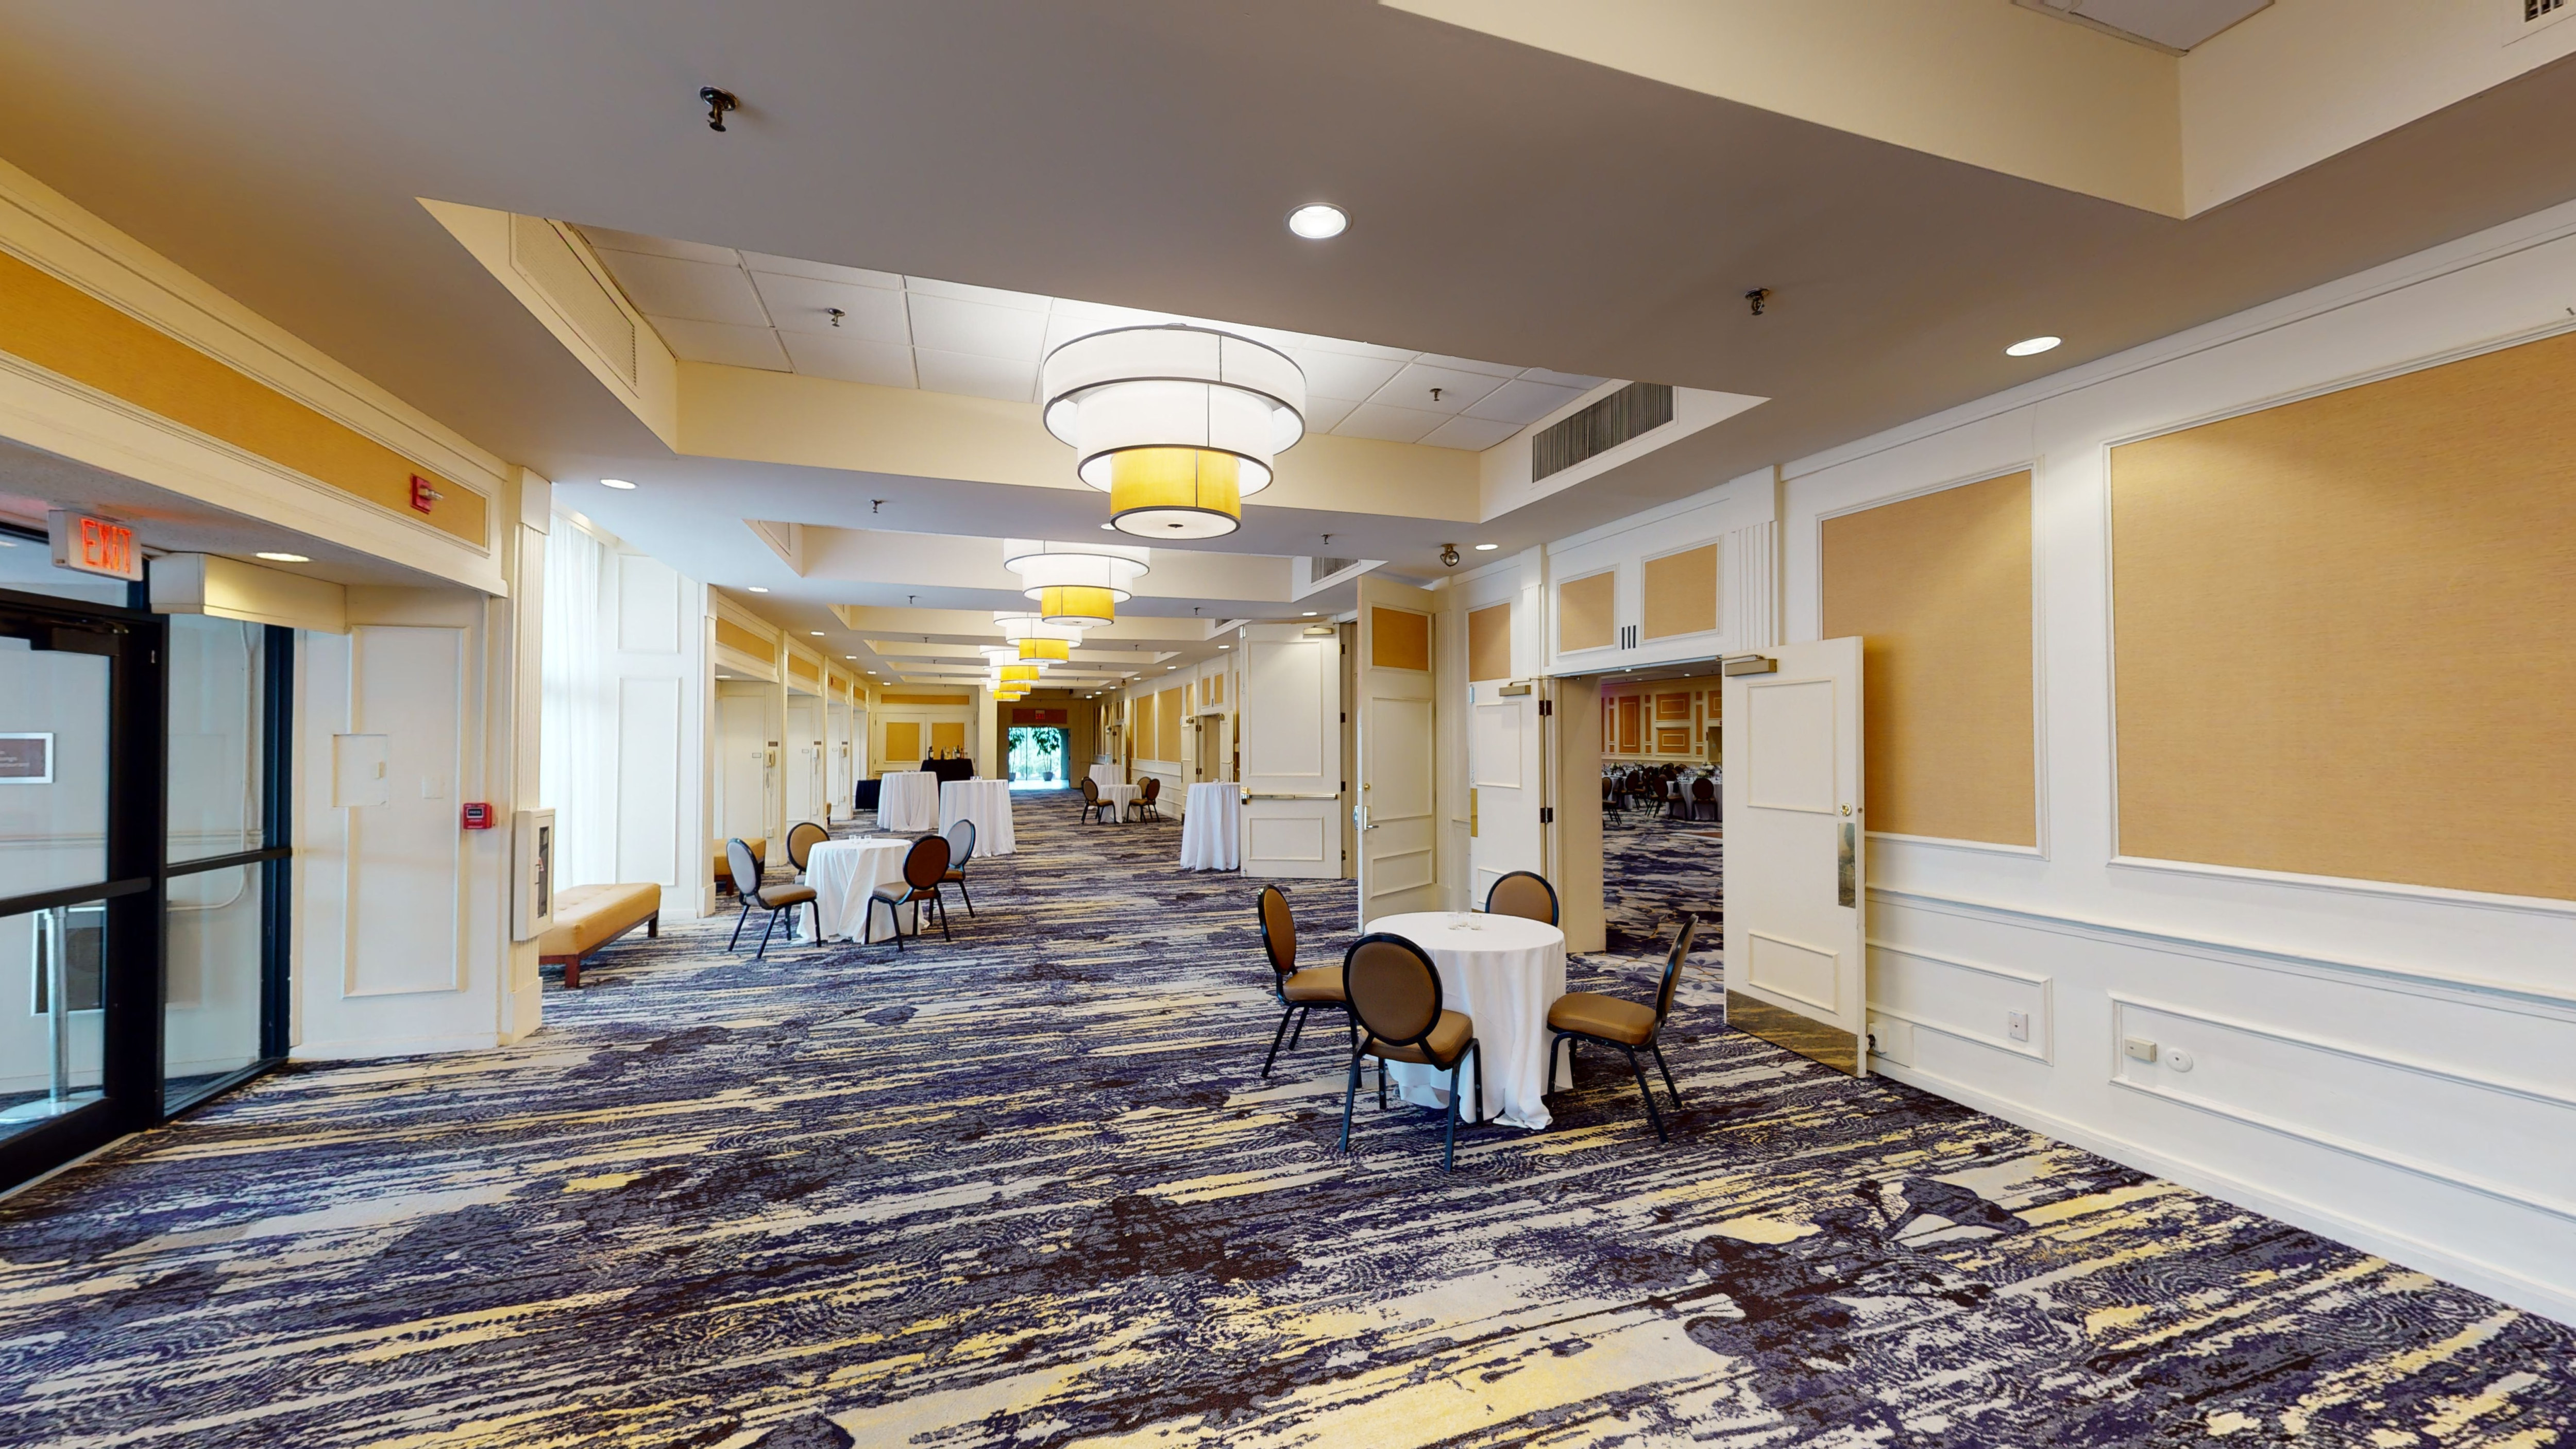 Ballroom Foyer Area with seating